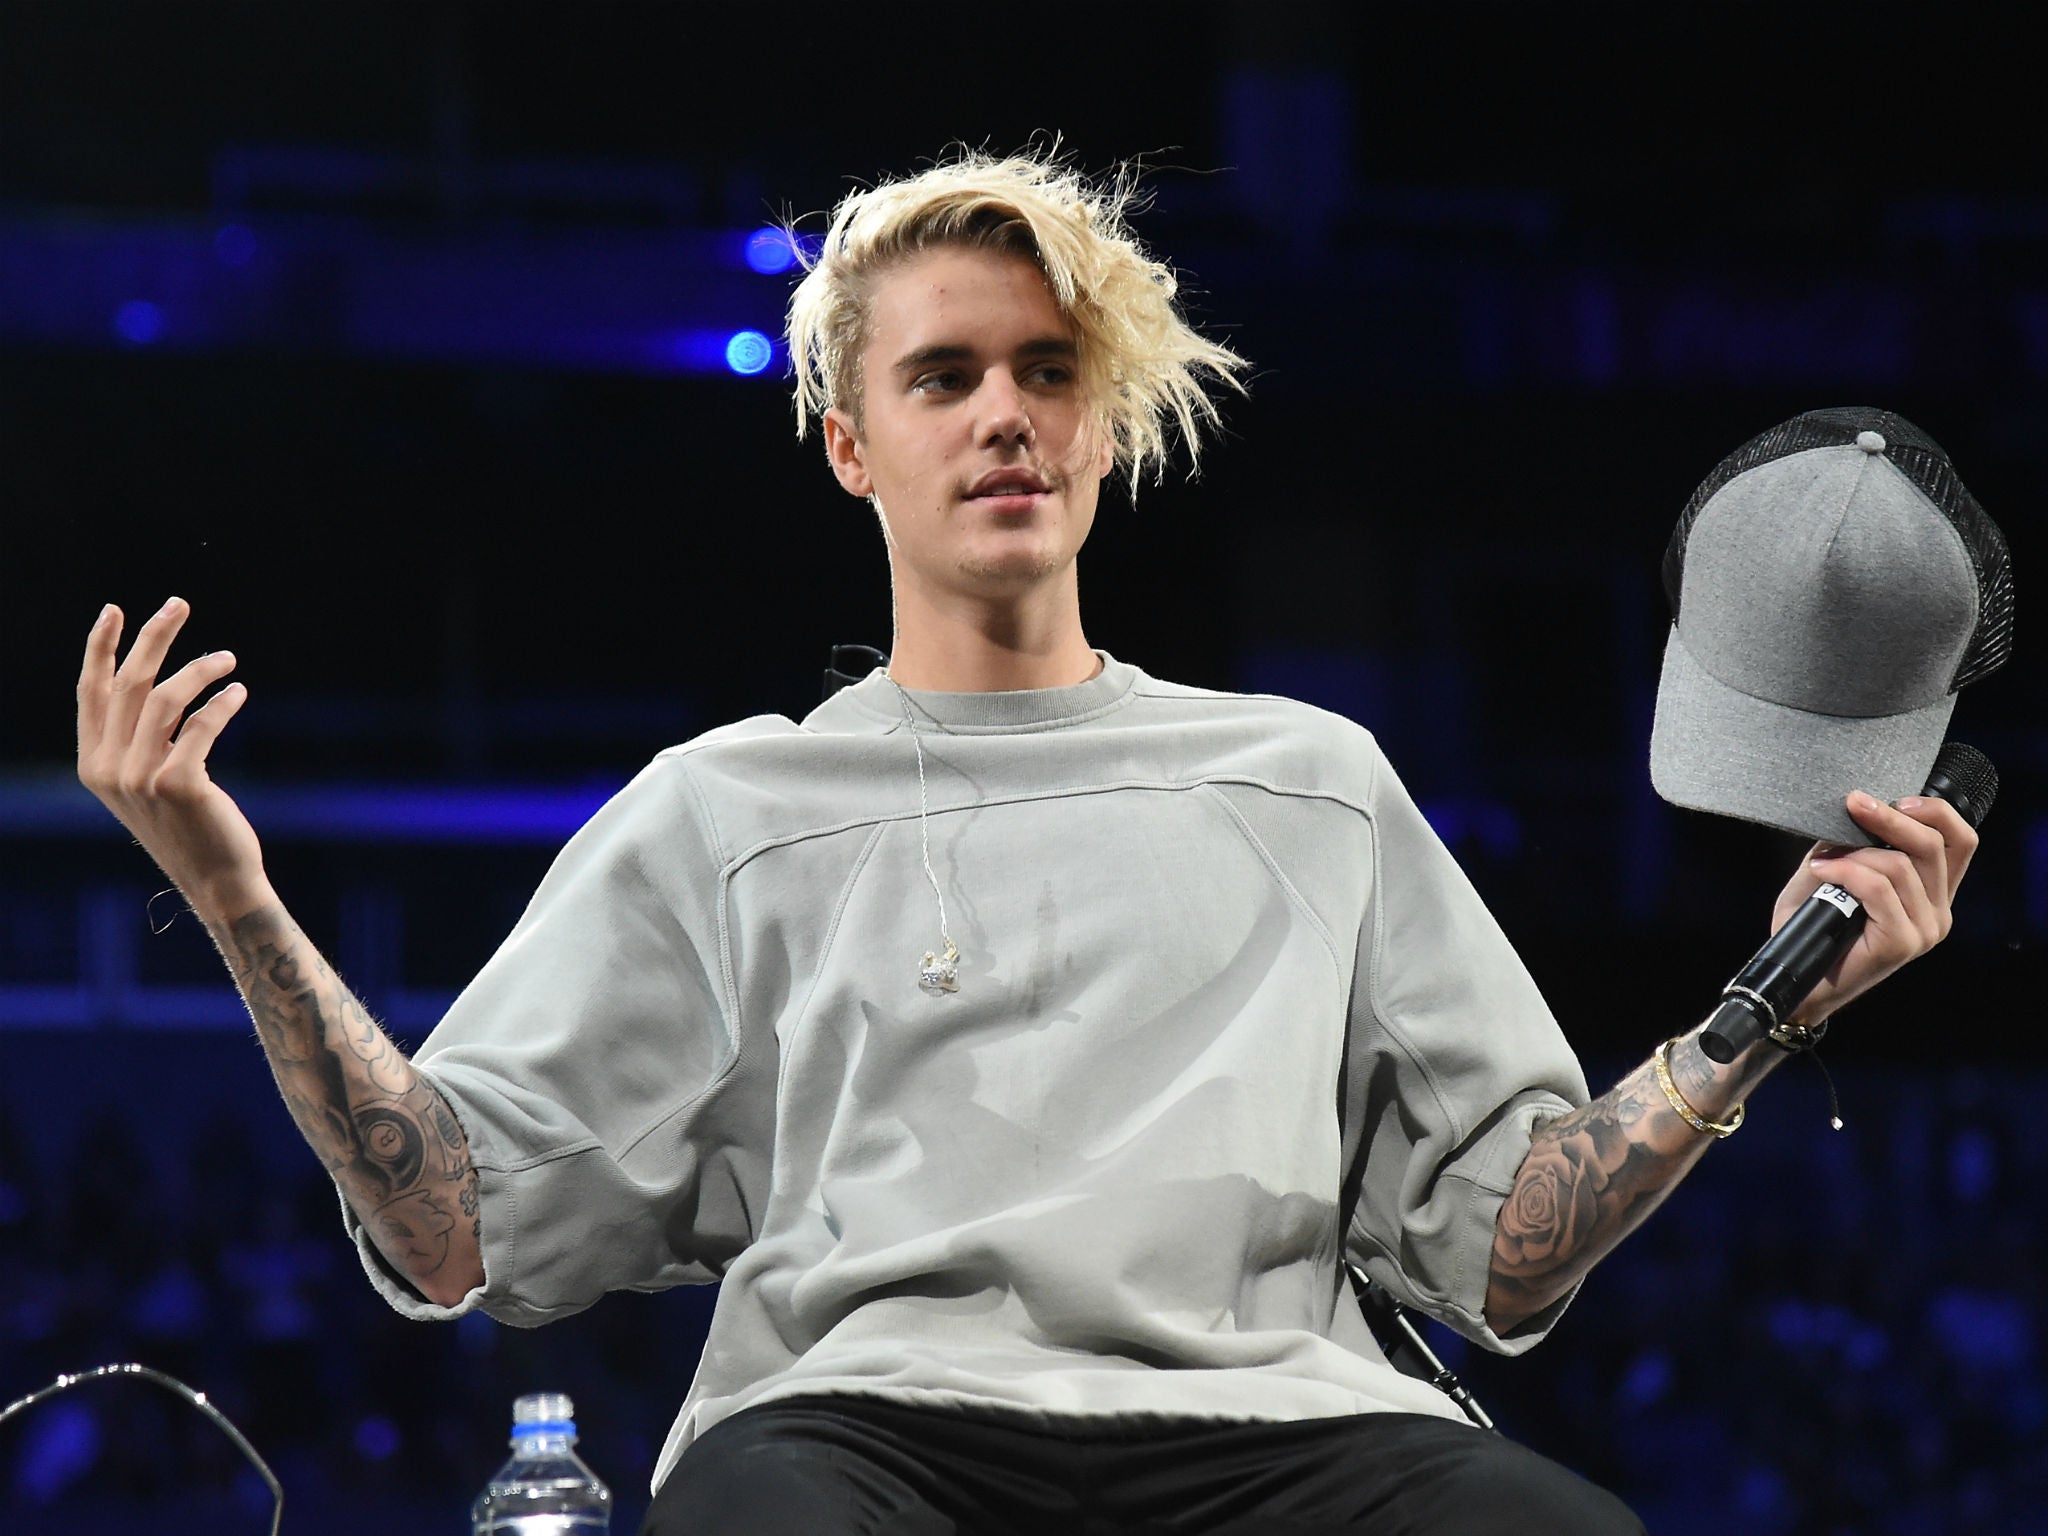 Justin Bieber uses dated slang to diss The Weeknd's music | The Independent